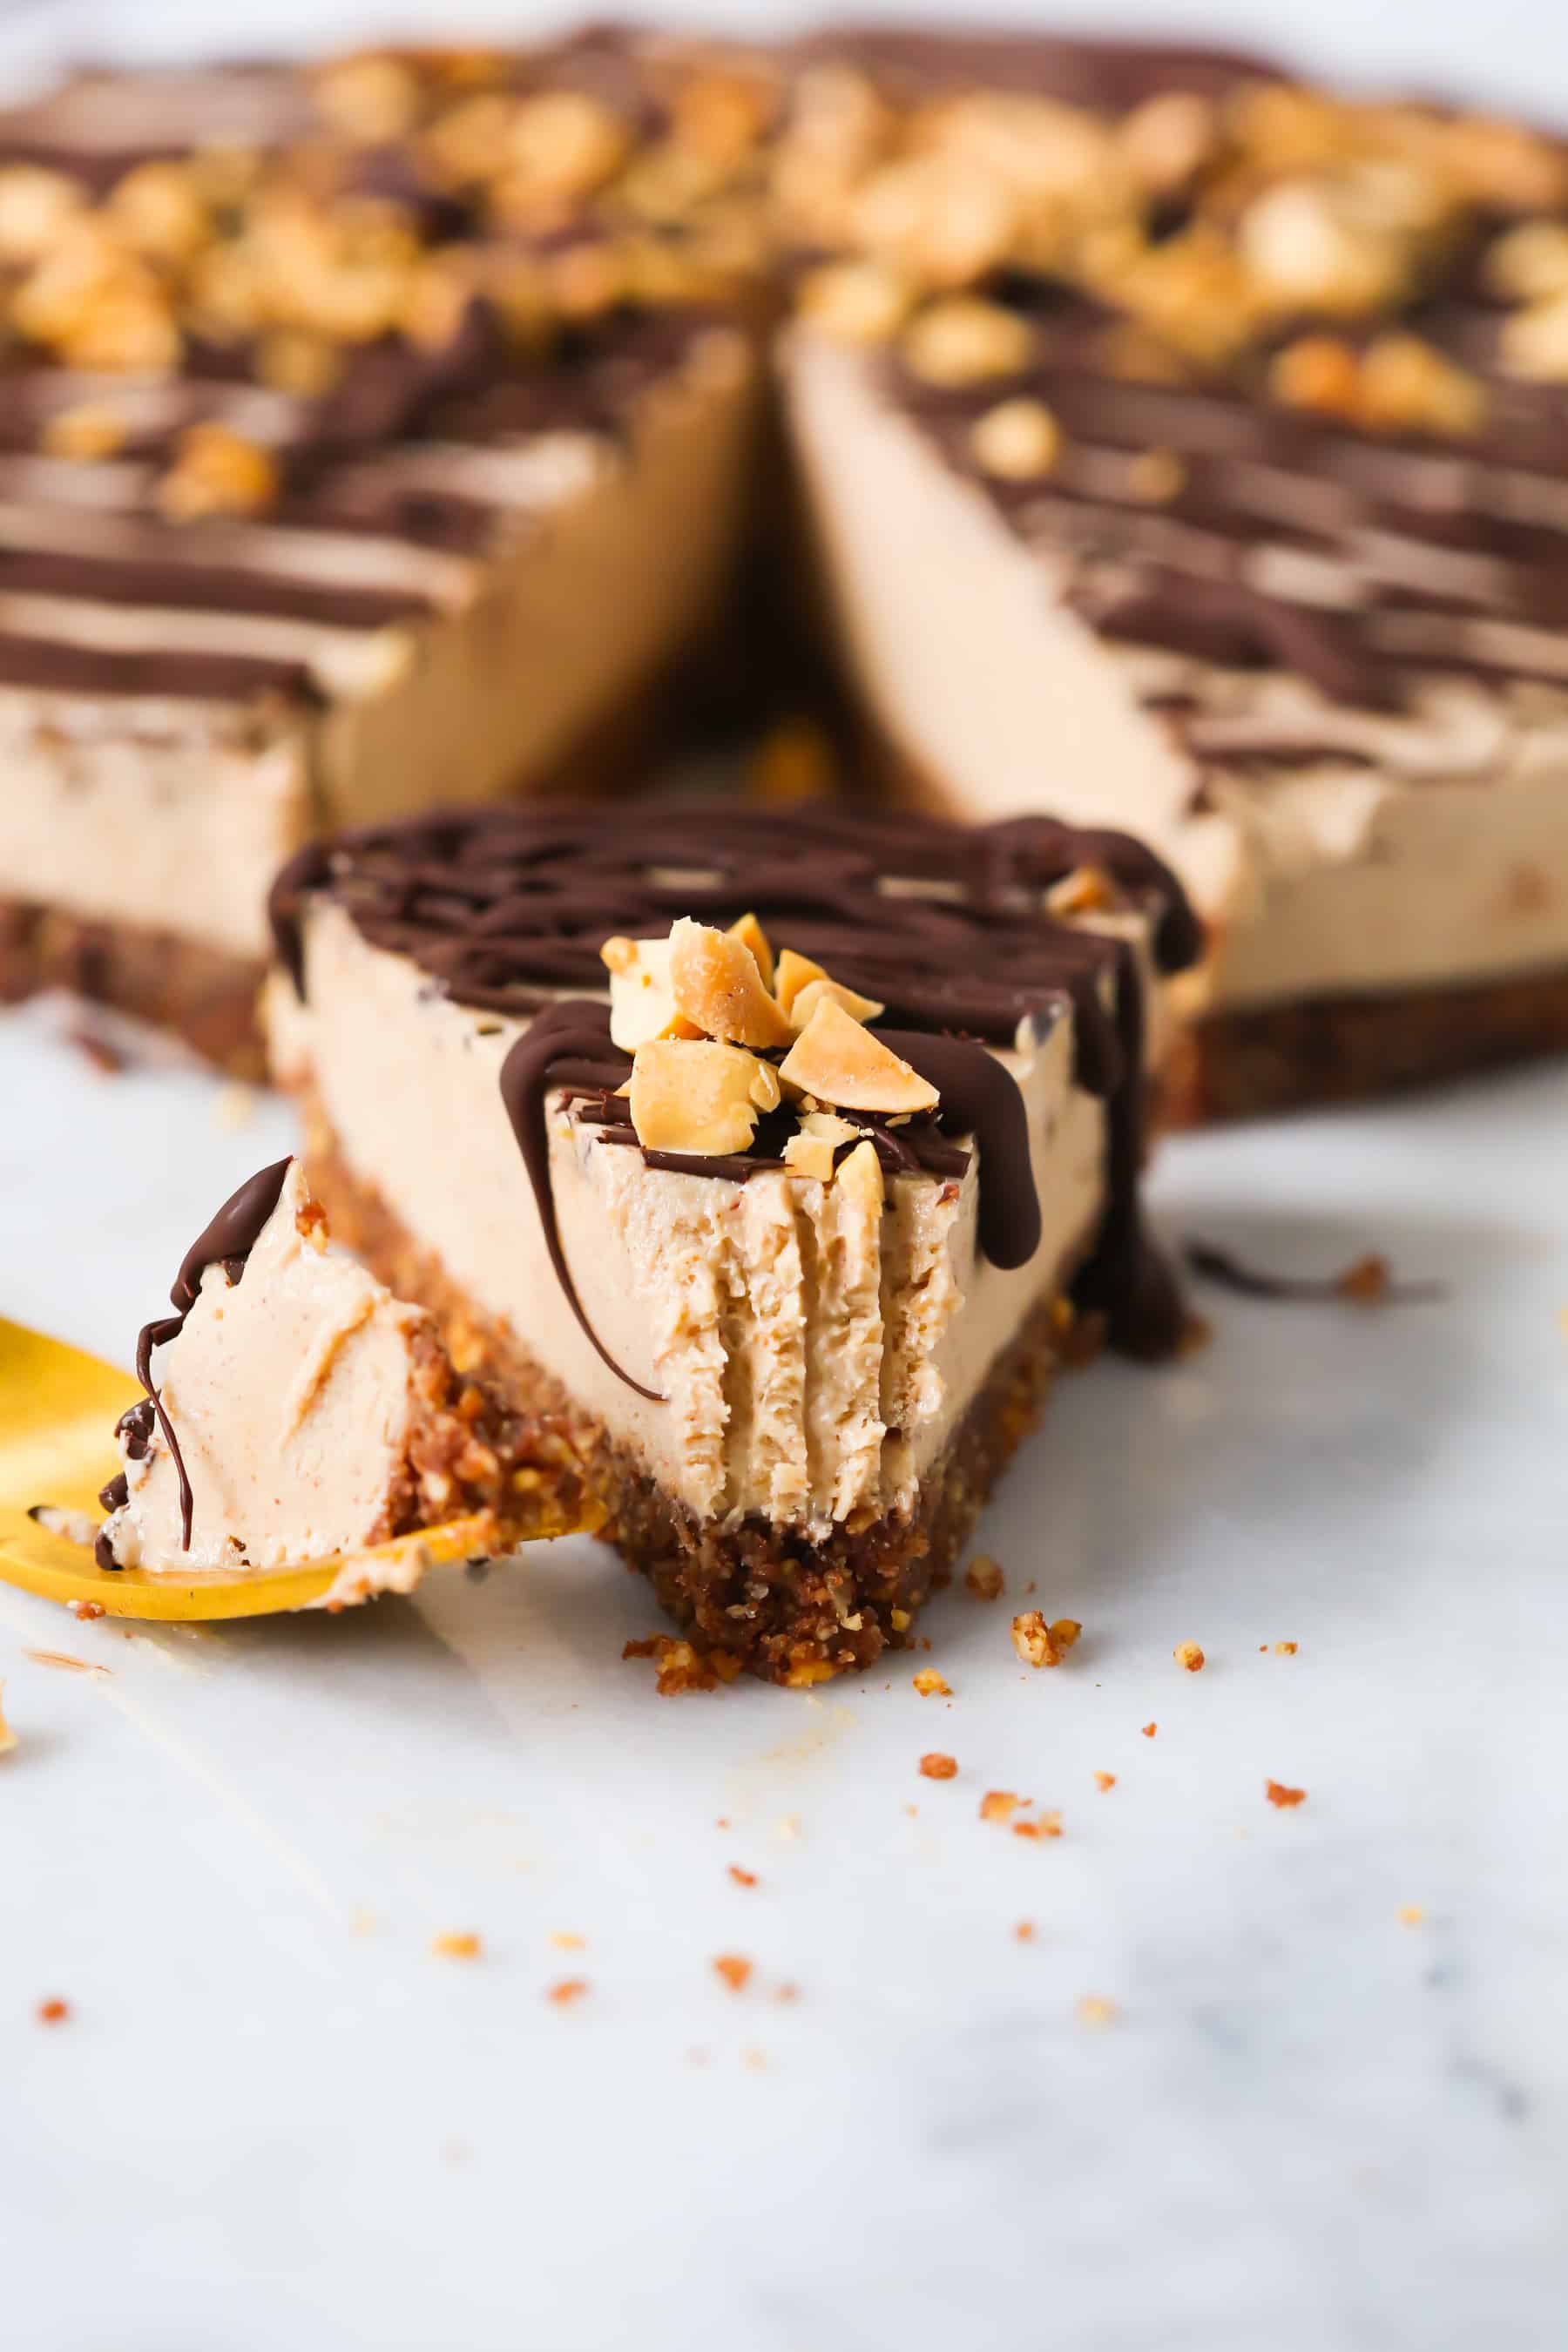 Gluten-free No Bake Peanut Butter Pie - This Gluten-free No Bake Peanut Butter Pie is very creamy, vegan, dairy-free, delicious and incredible easy to throw together.